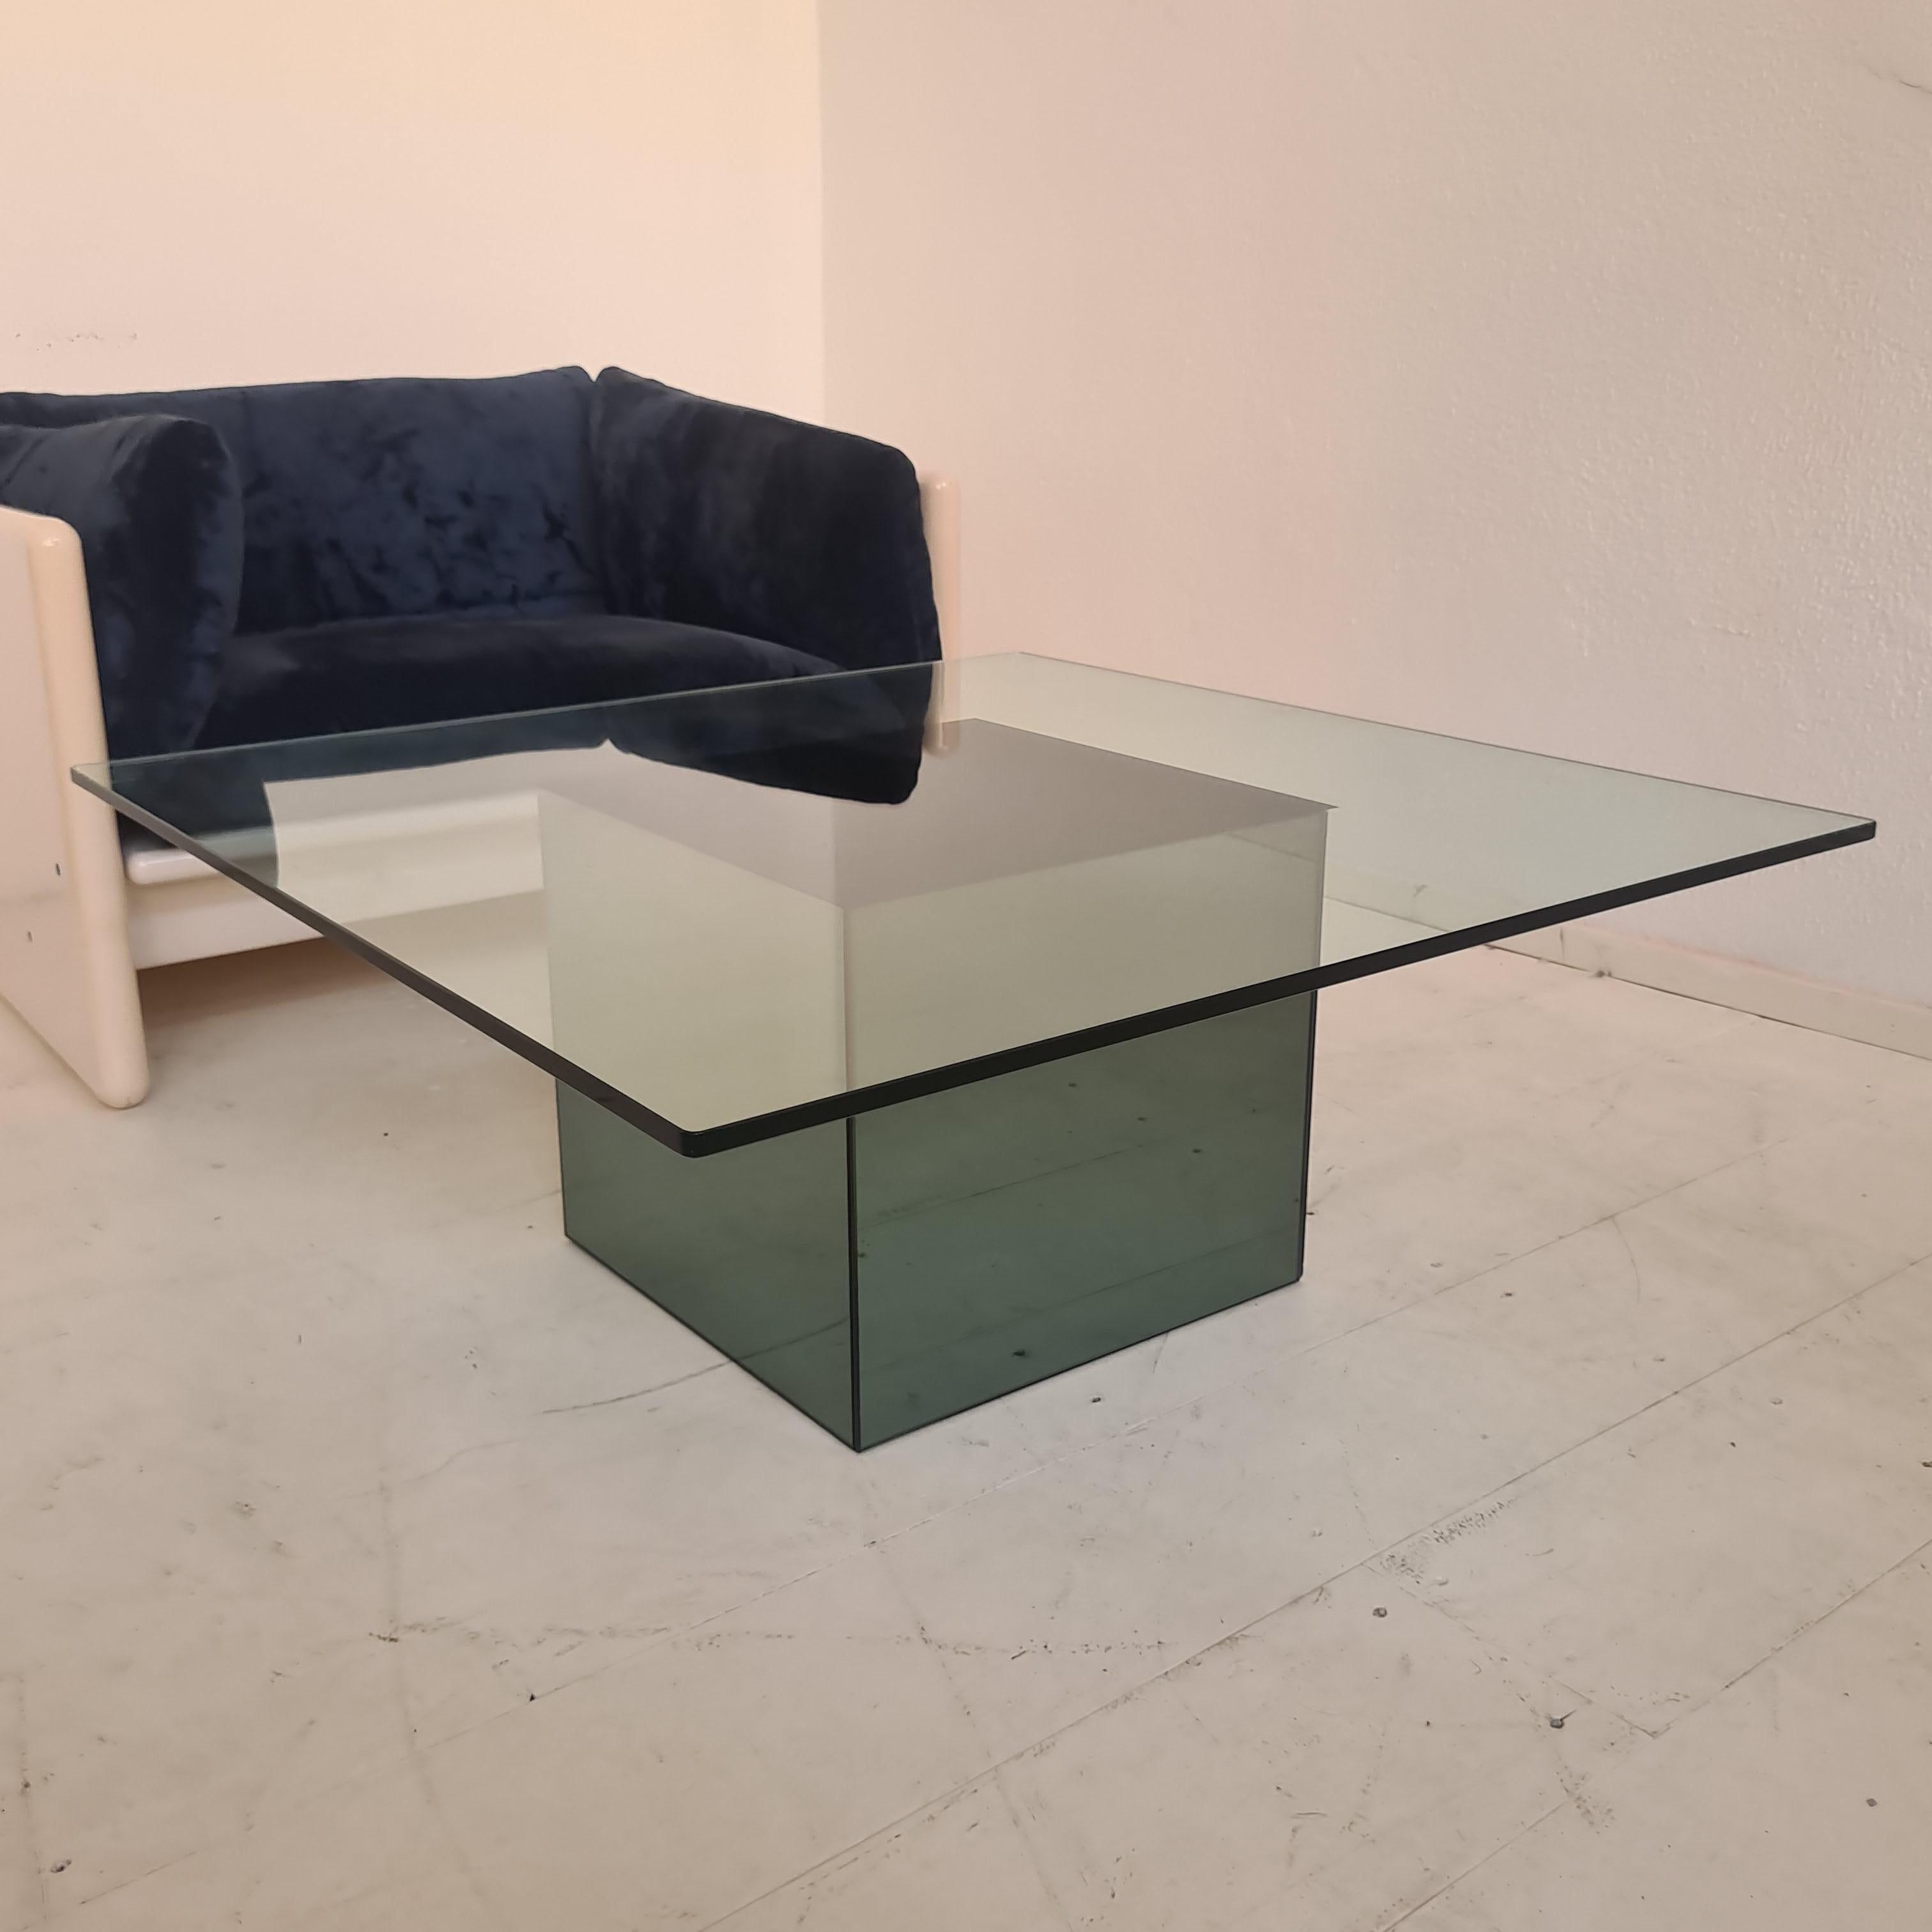 Iconic 1970s design coffee table with square glass top and mirror cube at base
Drawn  by Nanda Vigo in the early 1970s for the well-known company Acerbis 
excellent overall condition
only defect a small glass chip not visible at the base 
see last